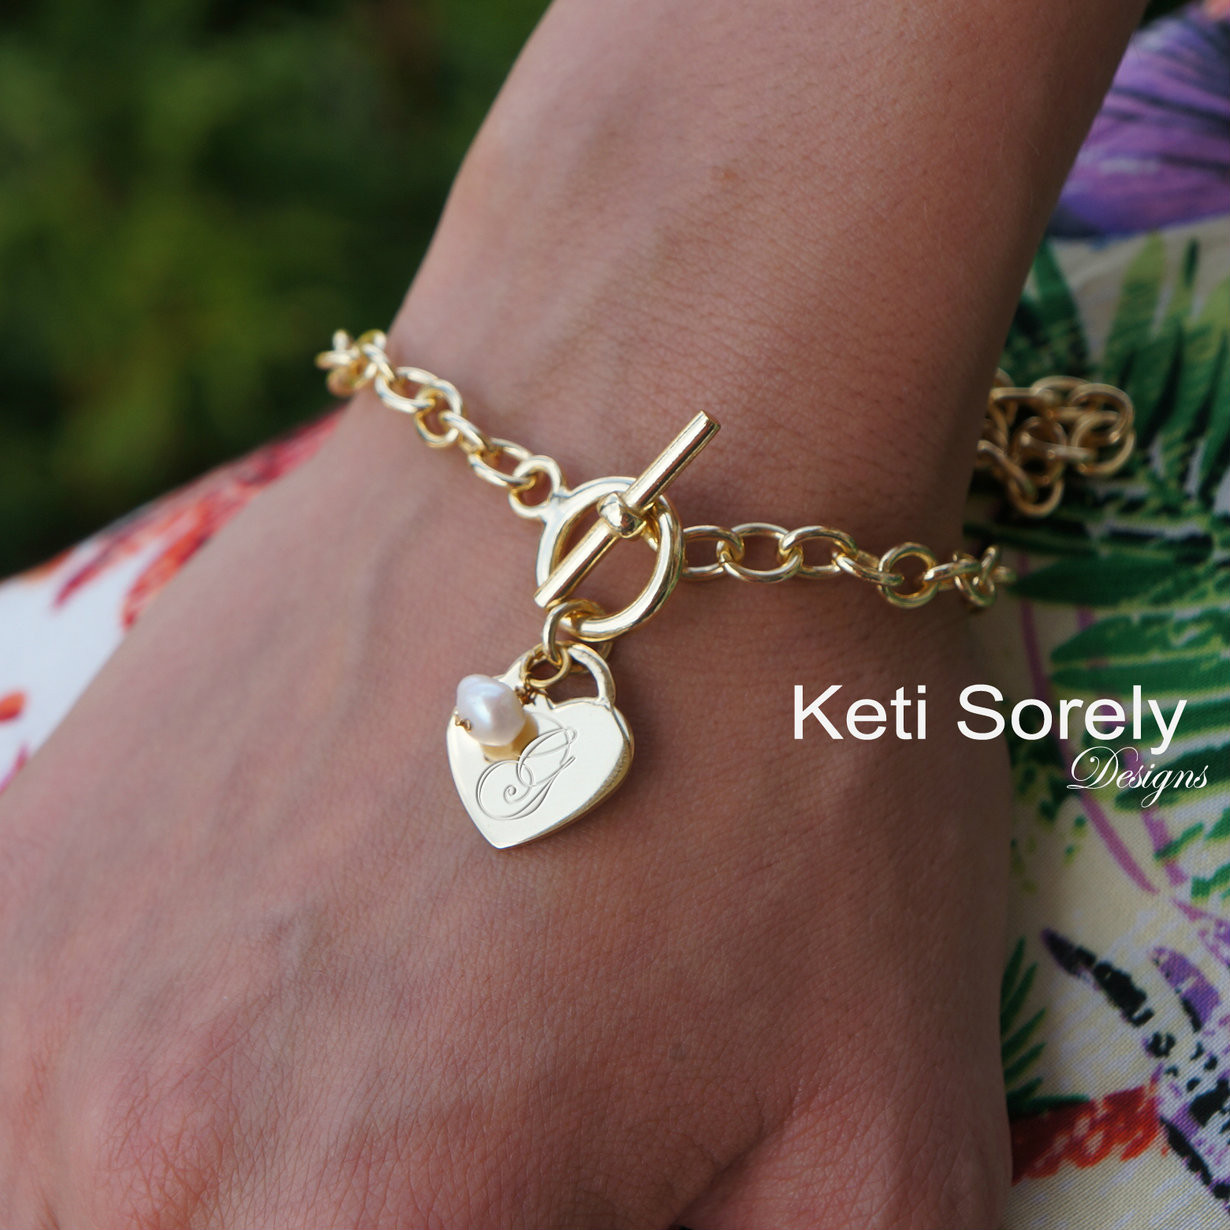 Personalized heart charm bracelet with hand engraved monogram initials and  pearl bead. Available is Sterling Silver , rose gold or yellow gold